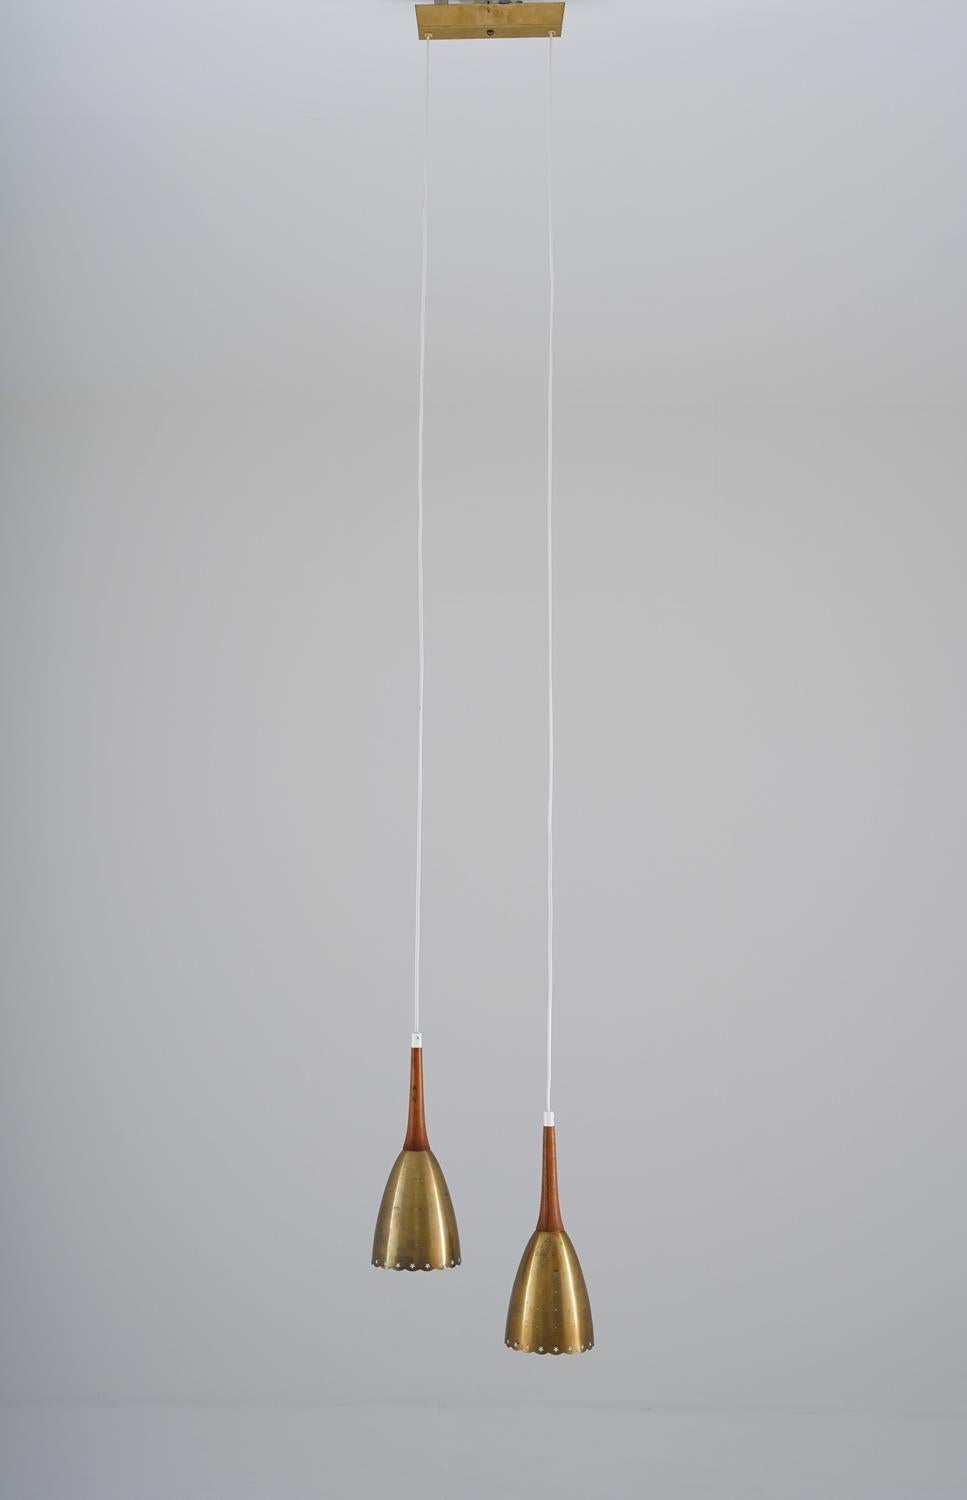 Elegant pendant in brass with wooden details, manufactured in Denmark, 1950s. 
The lamp consists of two pendants, hanging from a brass canopy. The shades are made of brushed perforated brass and look beautiful when lit. 

Condition: Good original